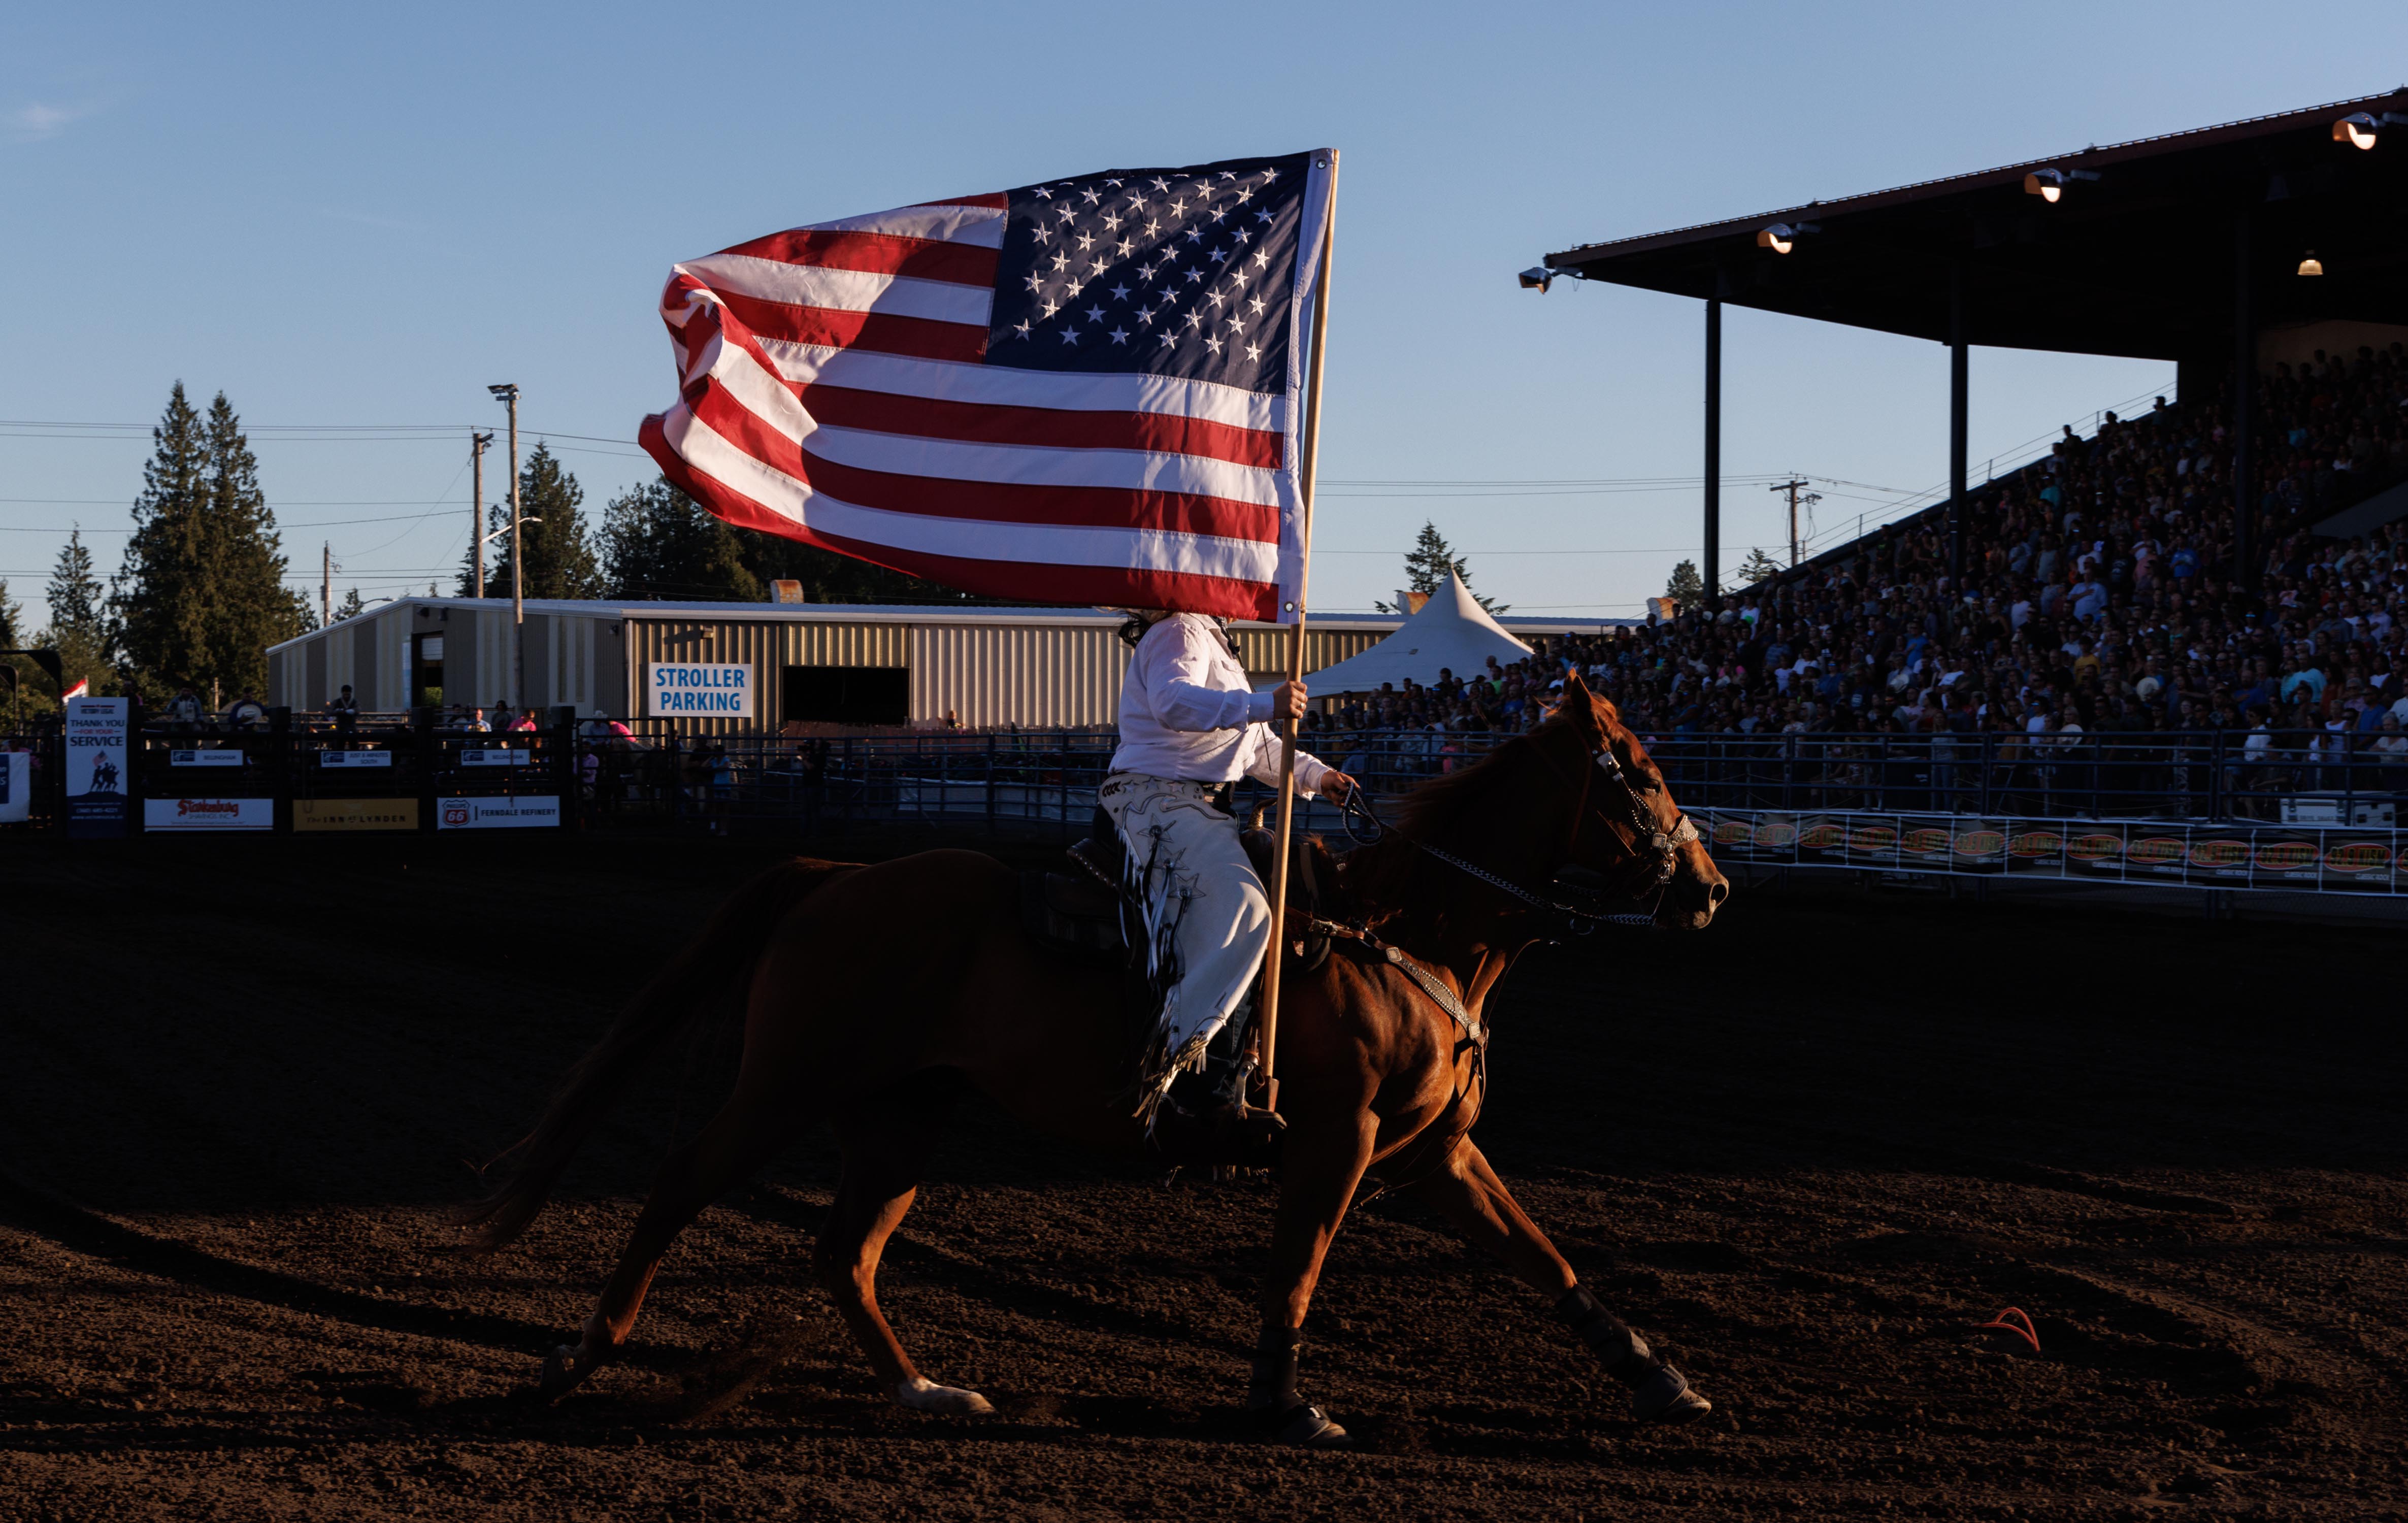 A rider parades the American flag around the arena during the National Anthem at the Lynden PRCA Rodeo on Aug. 15.